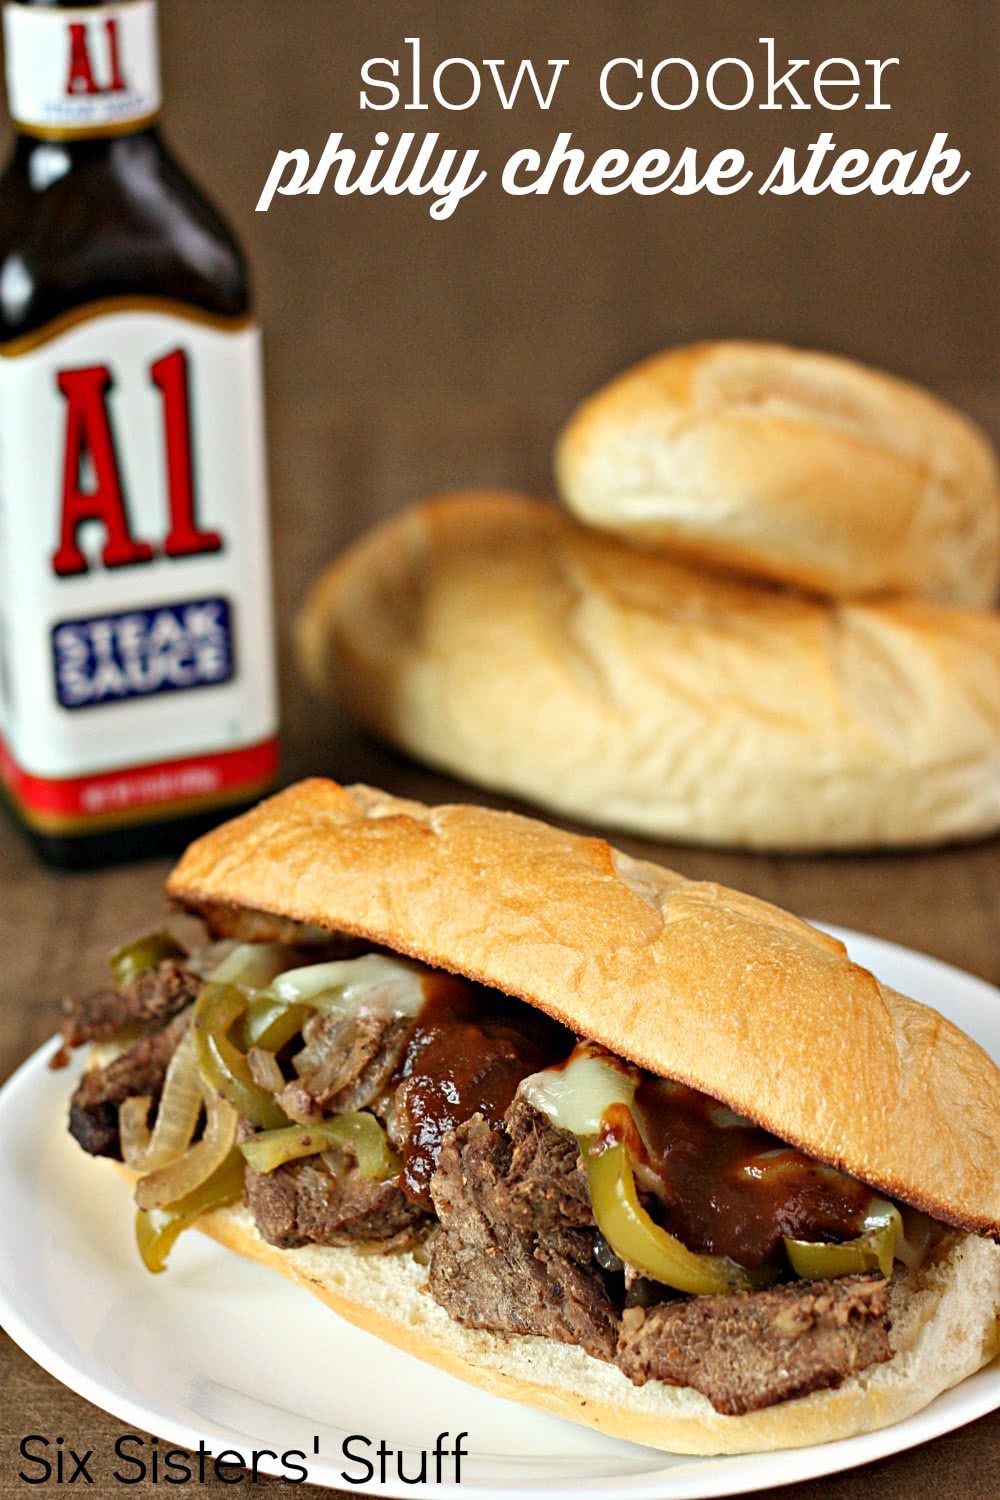 Slow Cooker Philly Cheese Steak Sandwiches Recipe